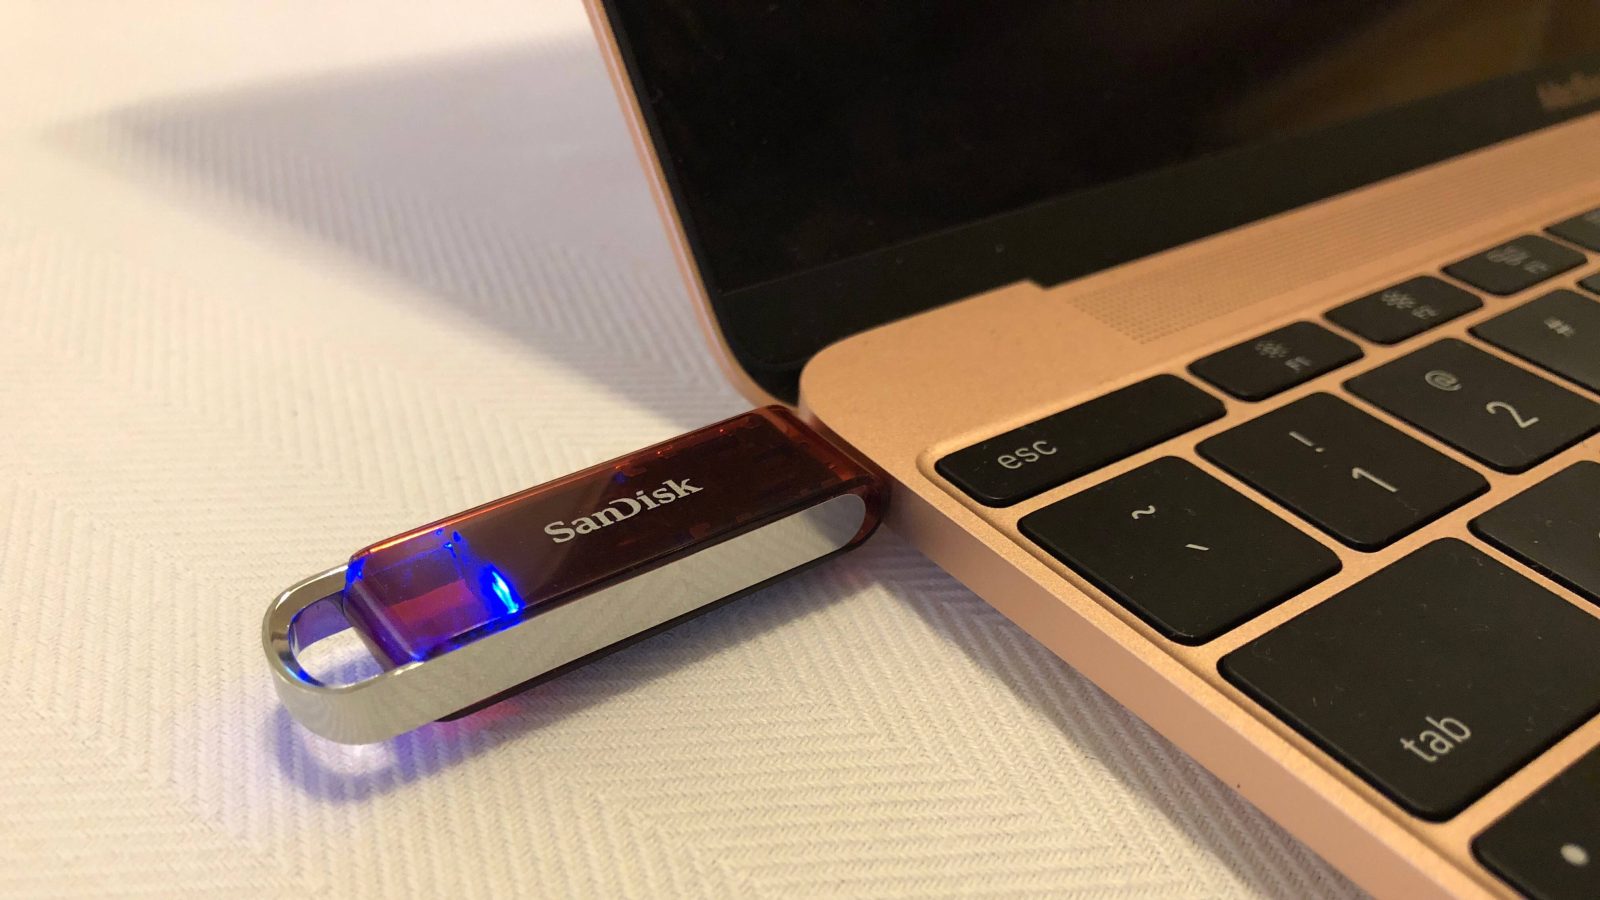 How to use flash drive with macbook air laptop